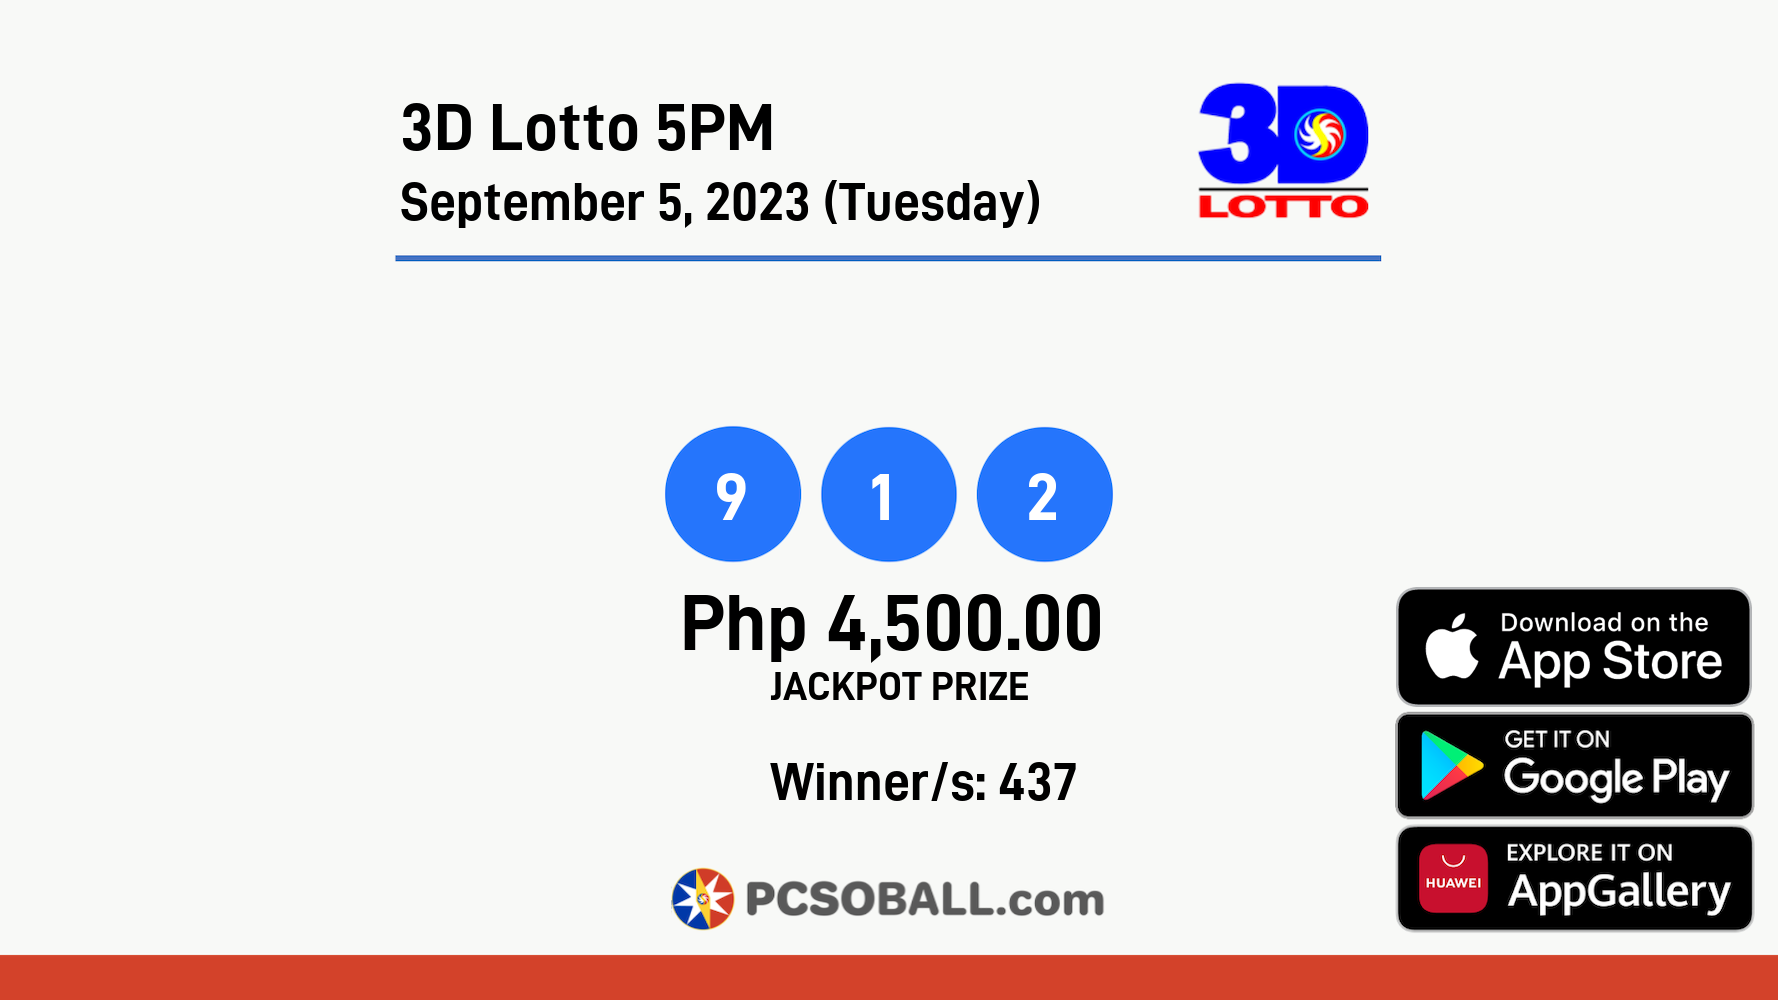 3D Lotto 5PM September 5, 2023 (Tuesday) Result